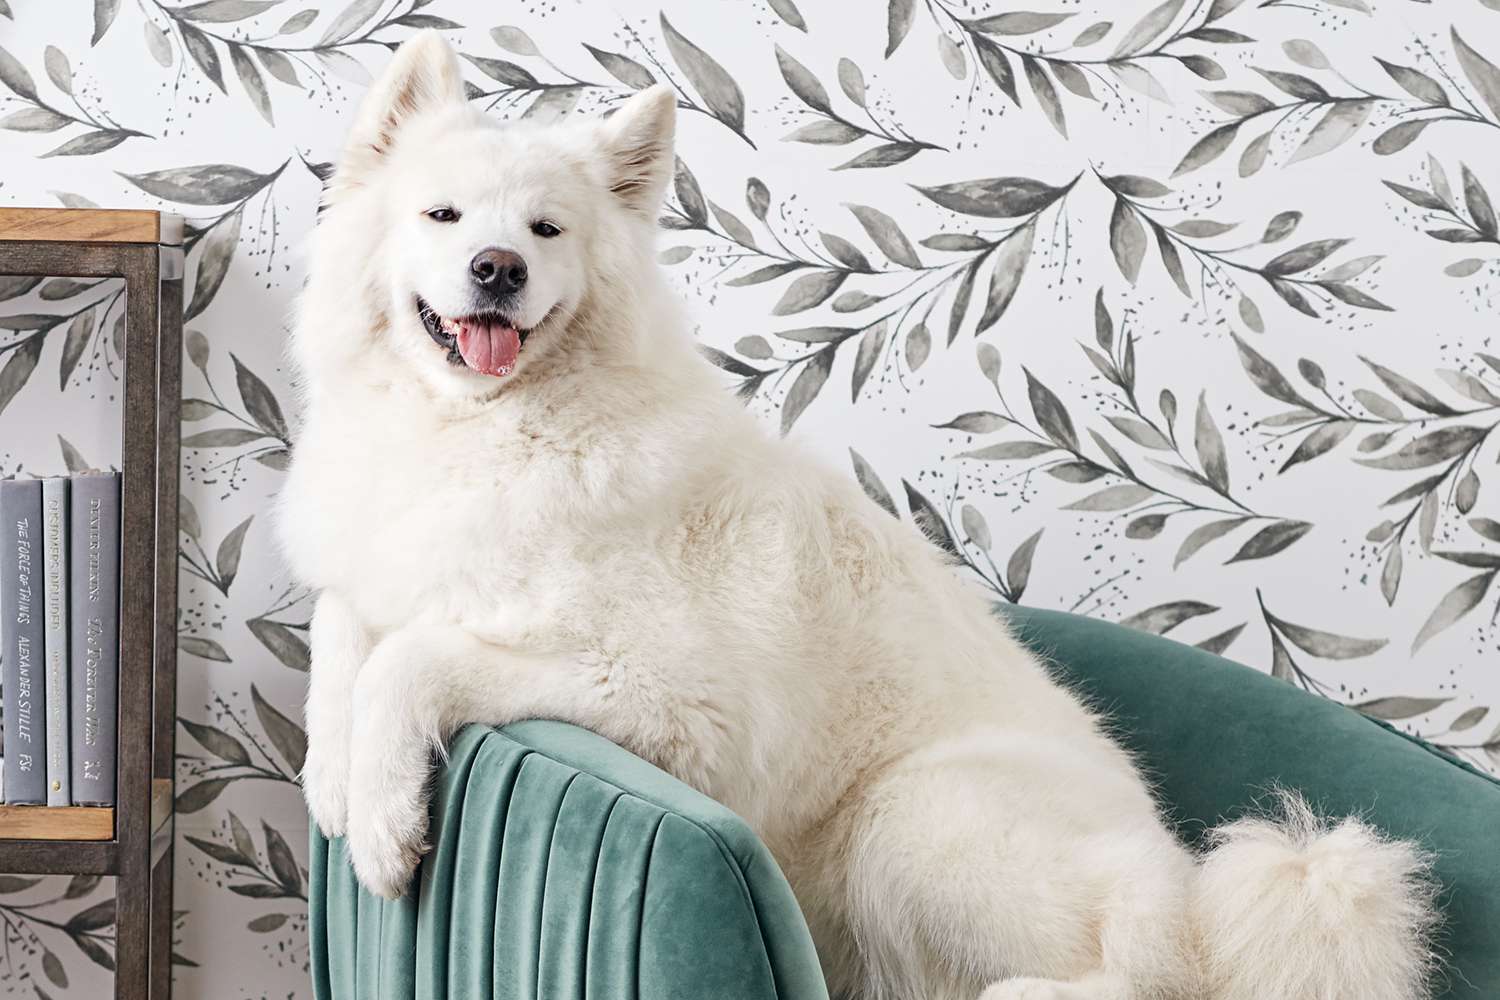 A Samoyed on a chair